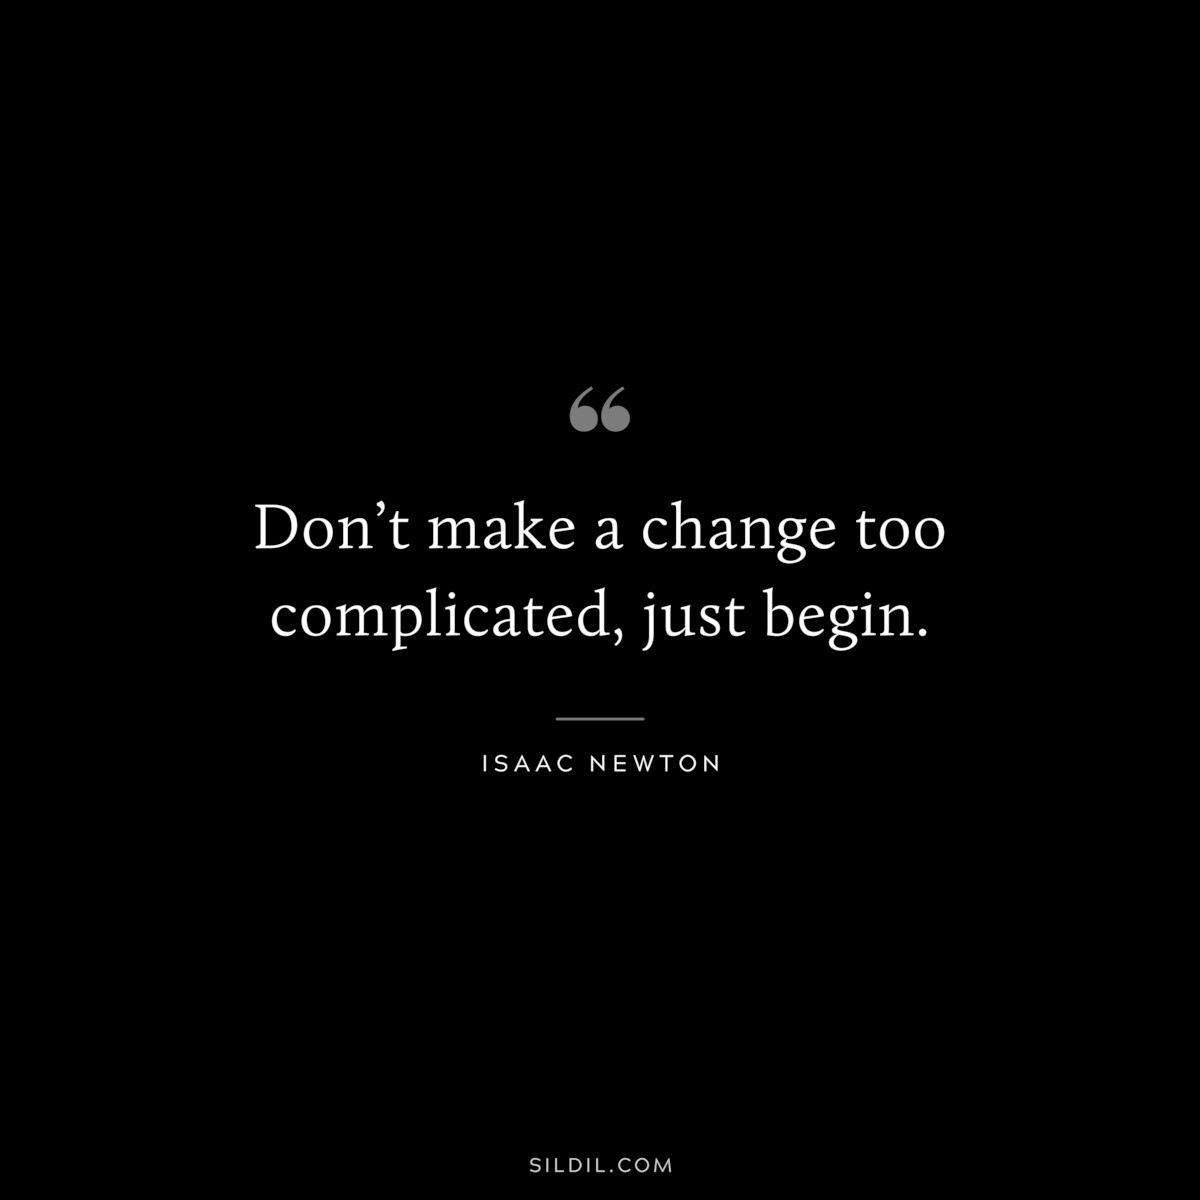 Don’t make a change too complicated, just begin.